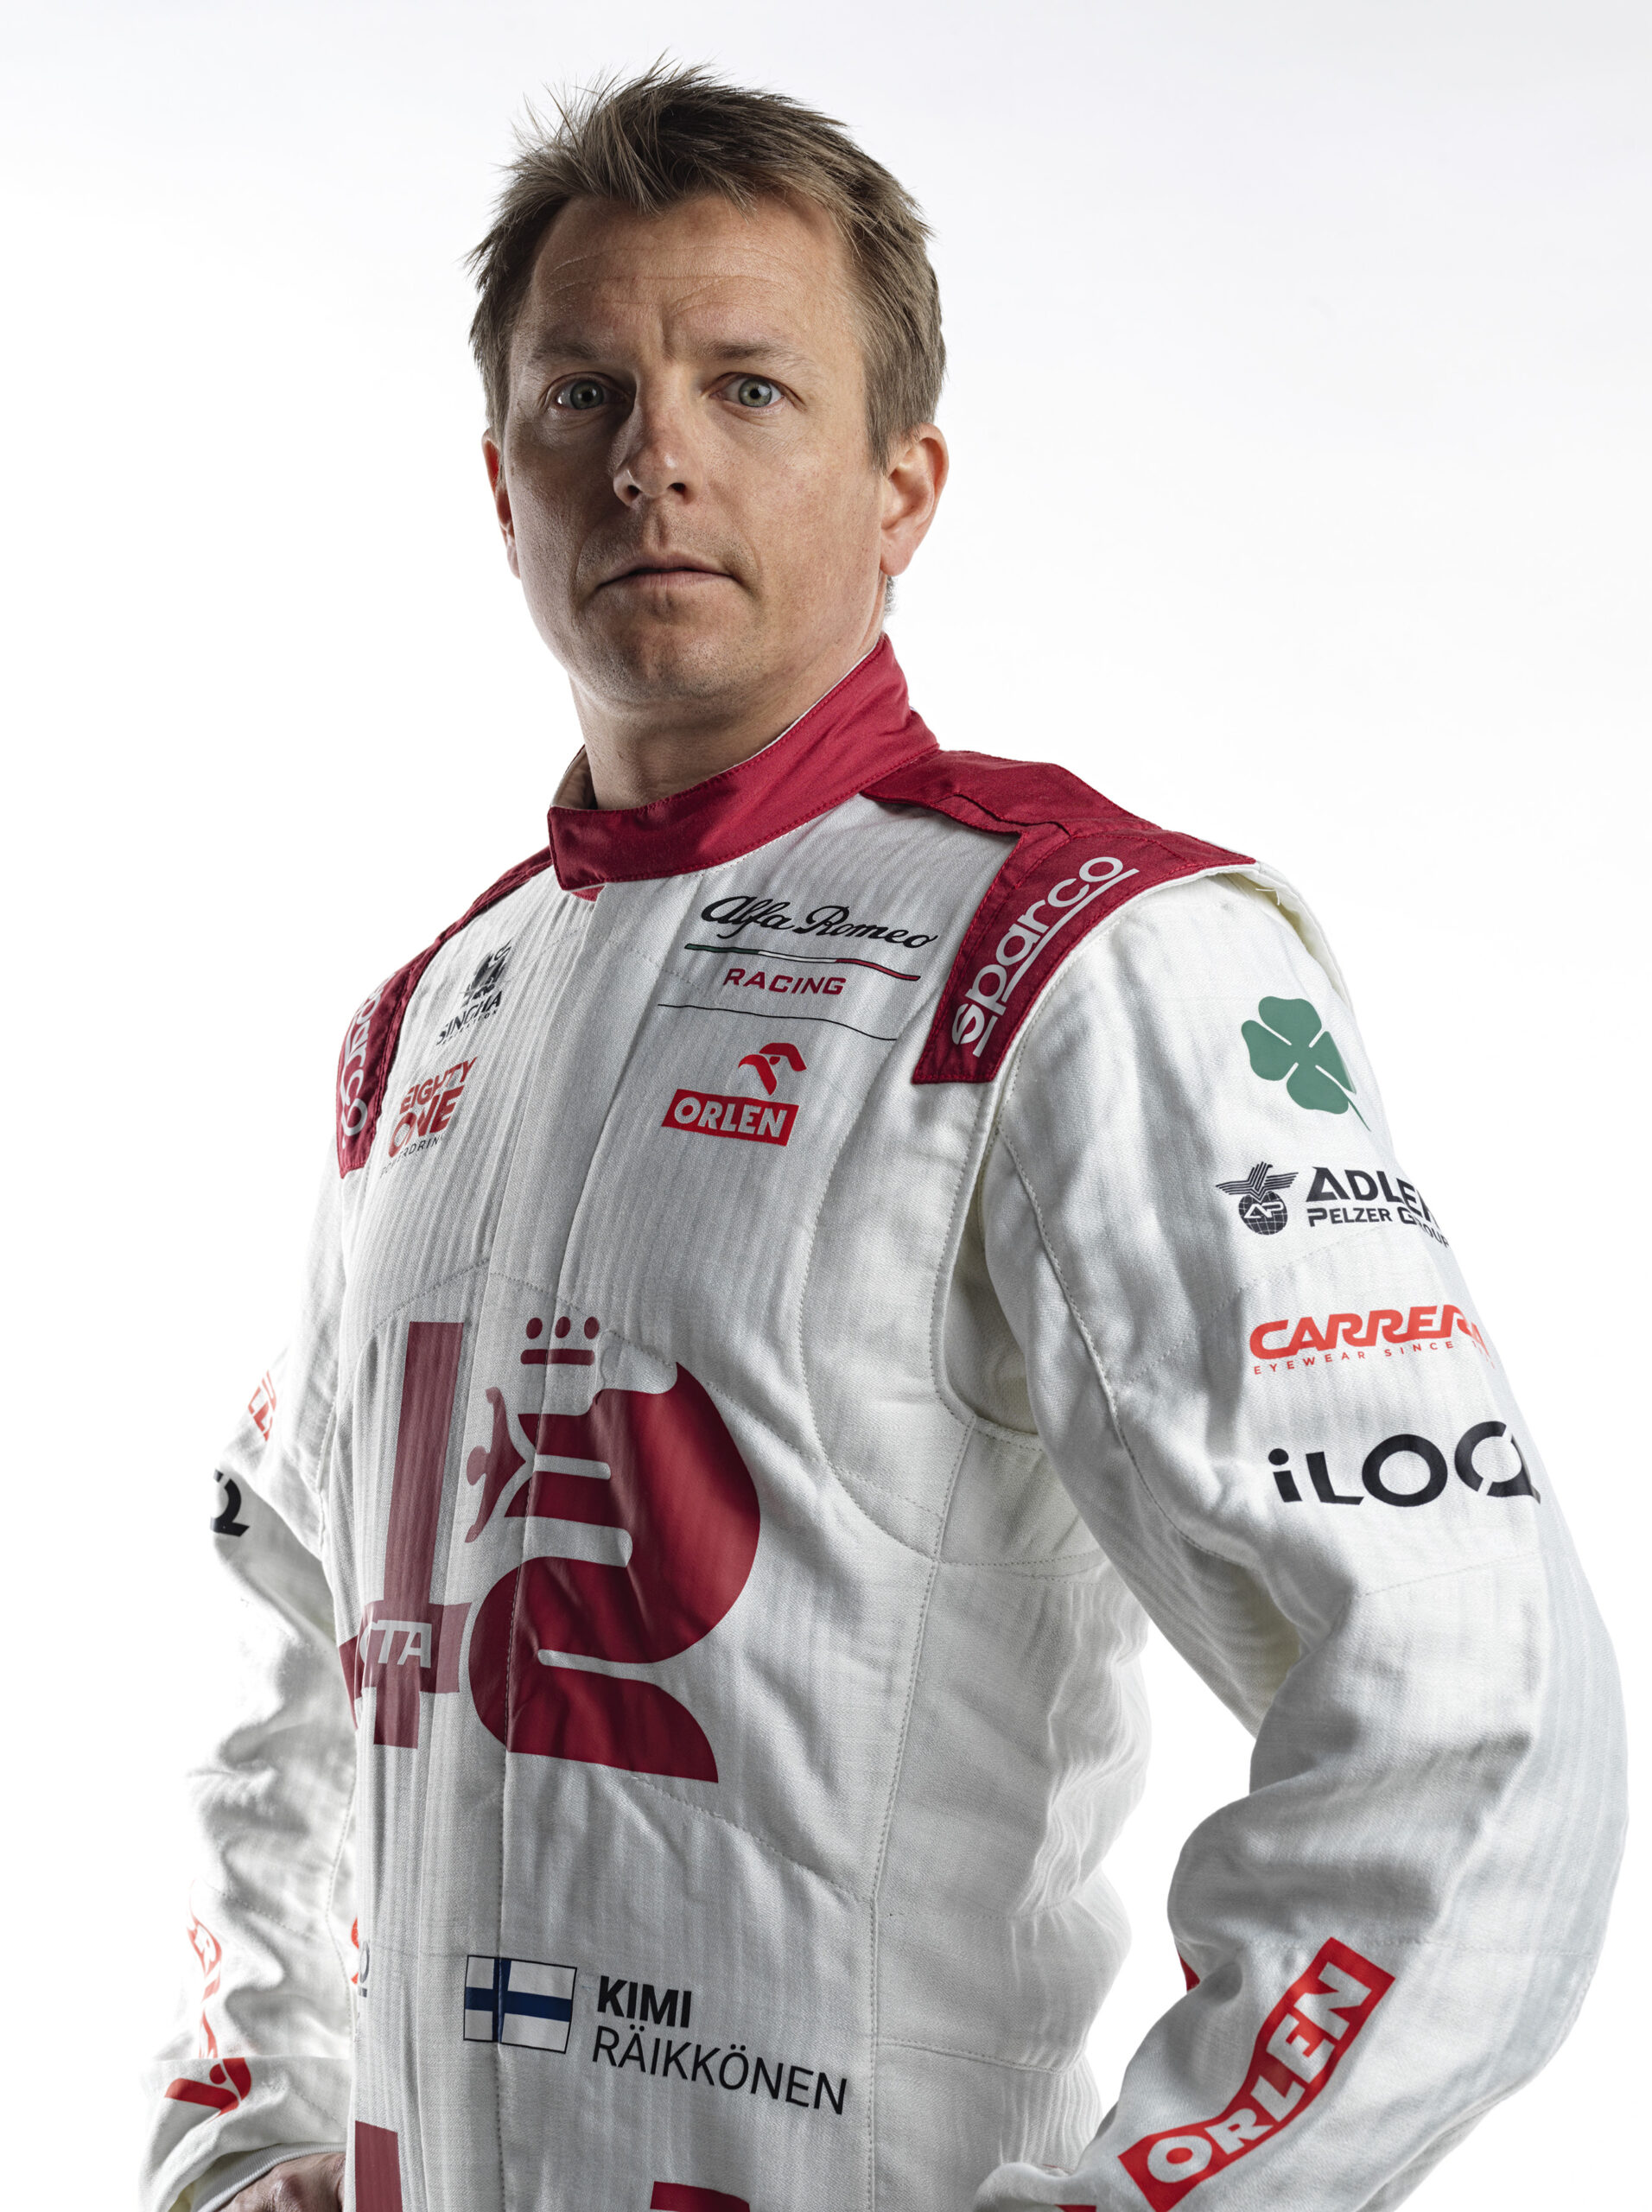 By and large, Kimi Räikkönen remains one of the most determined racers in Formula 1. (Photo: Sven Germann | Alfa Romeo Racing ORLEN)